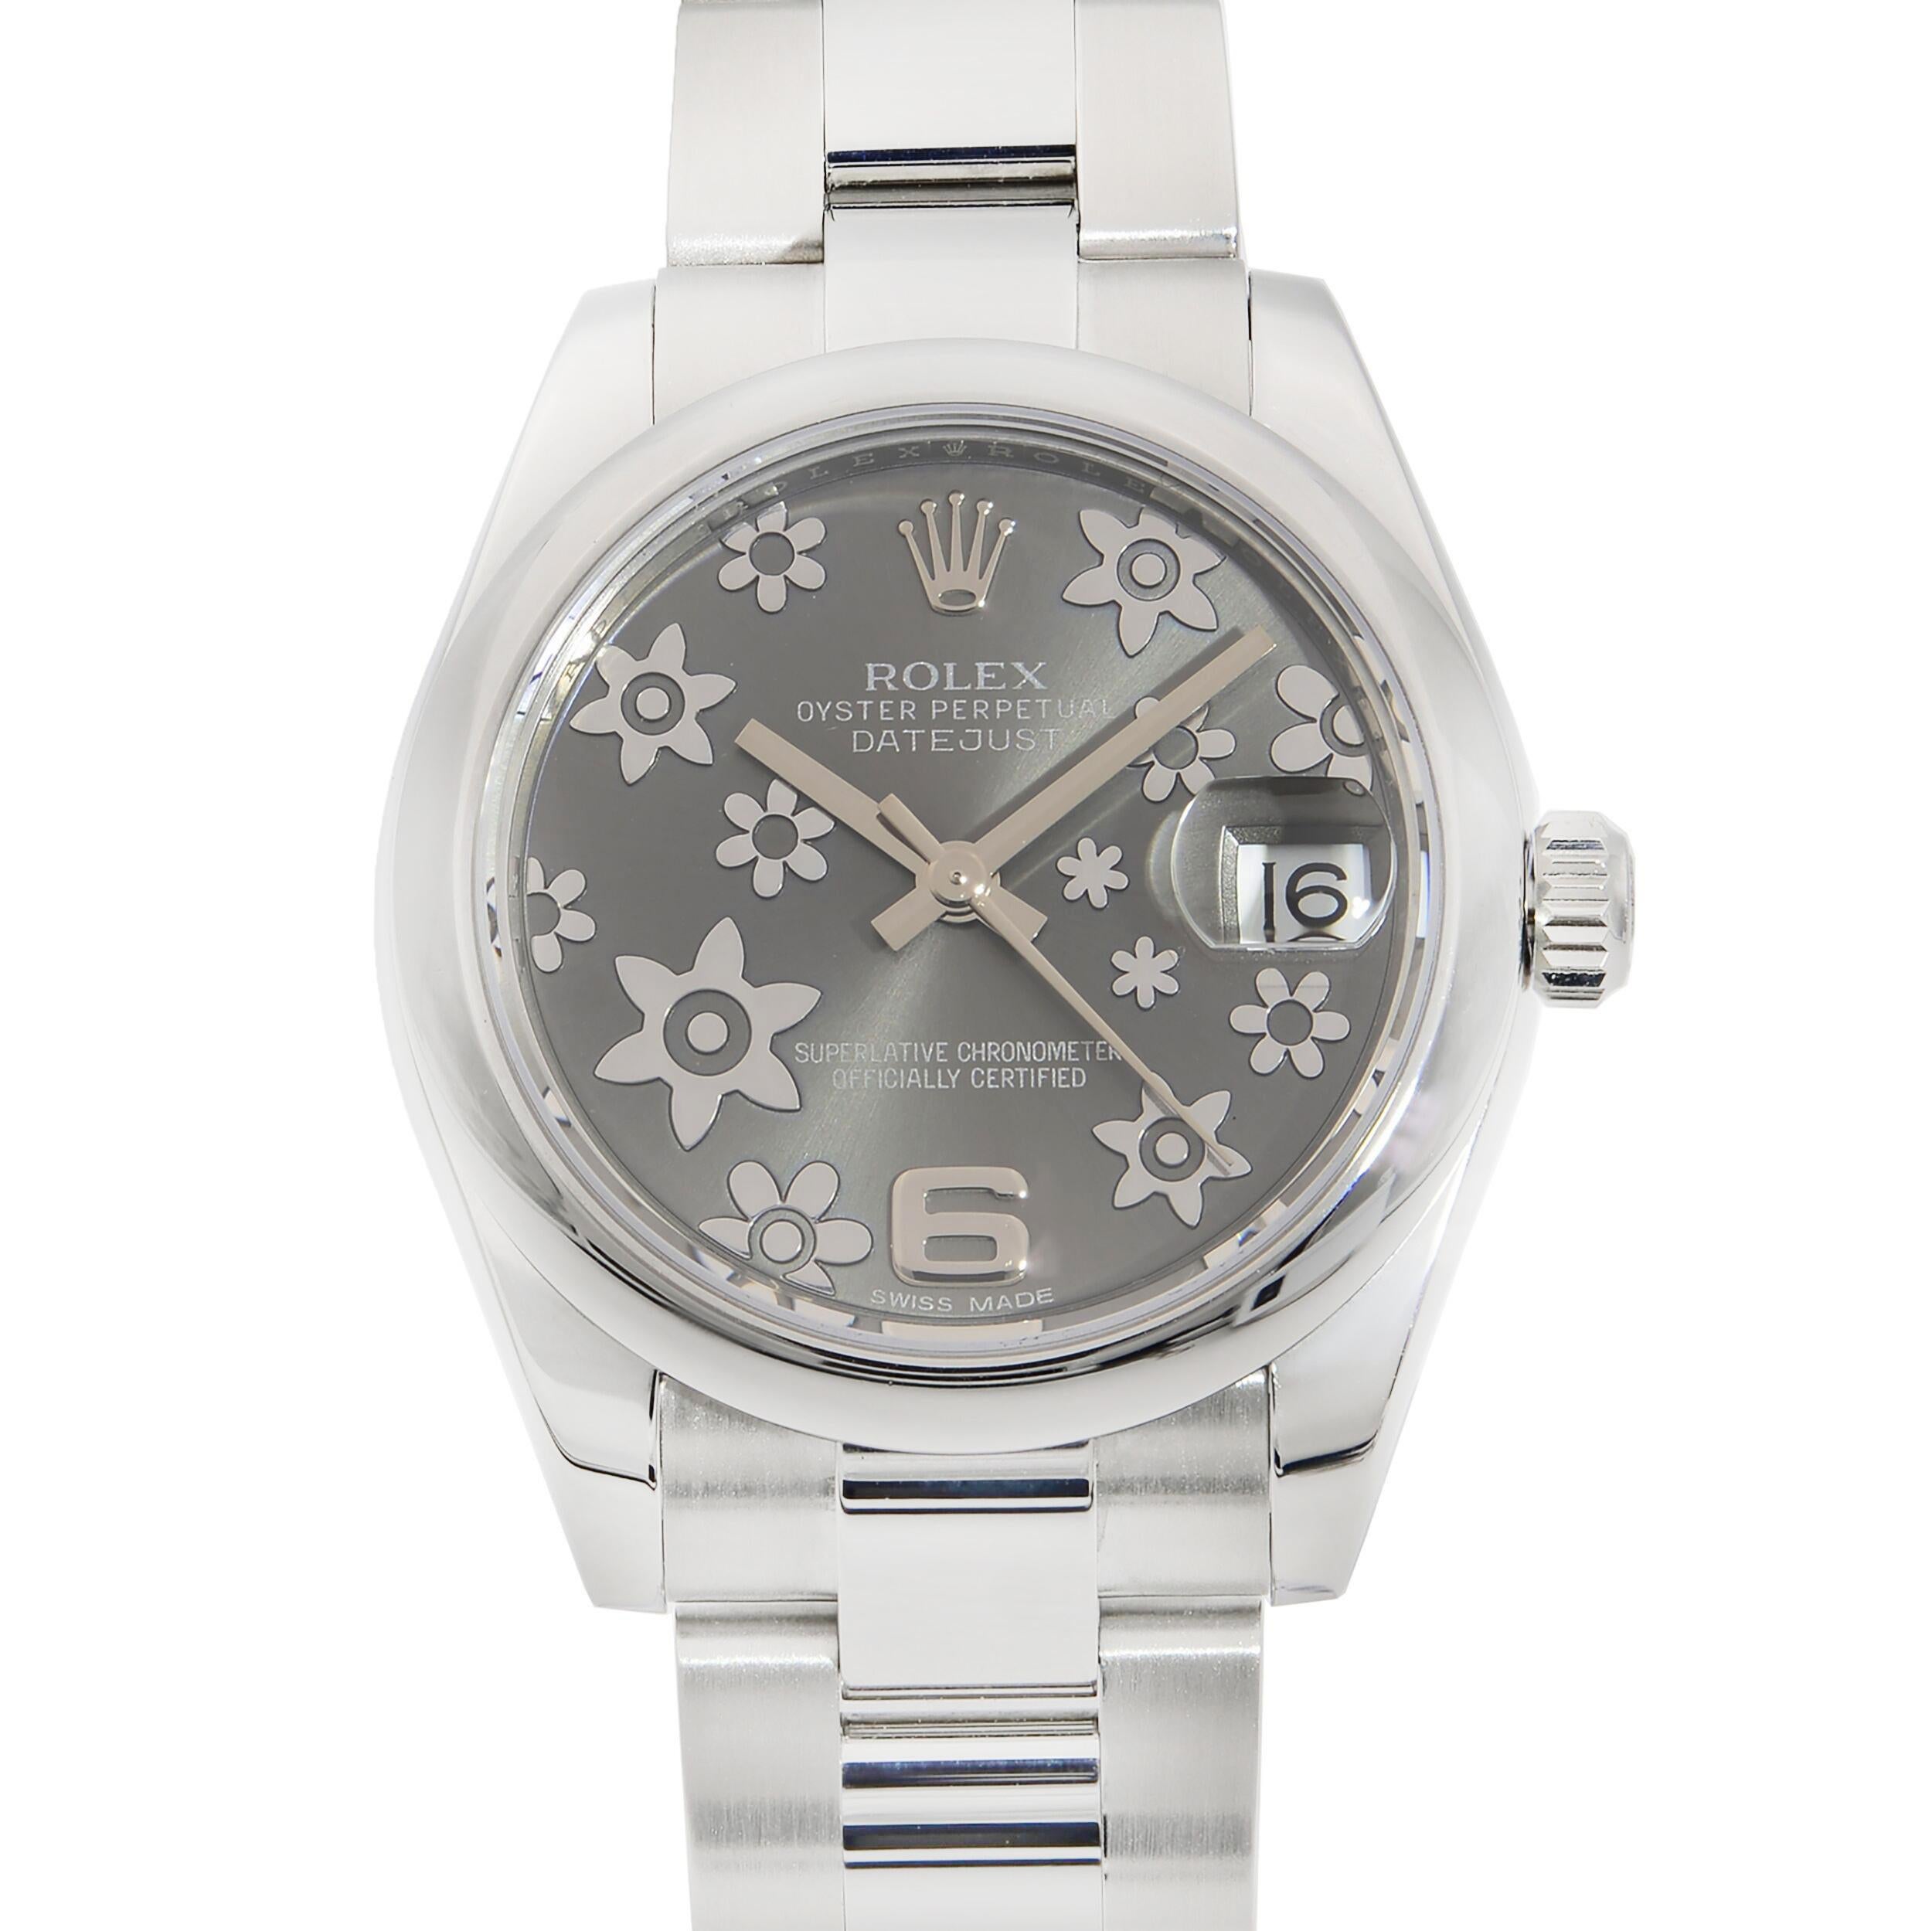 This pre-owned Rolex Datejust 178240RFO is a beautiful Ladie's timepiece that is powered by a mechanical (automatic) movement which is cased in a stainless steel case. It has a round shape face, date indicator dial, and has hand Arabic numerals,